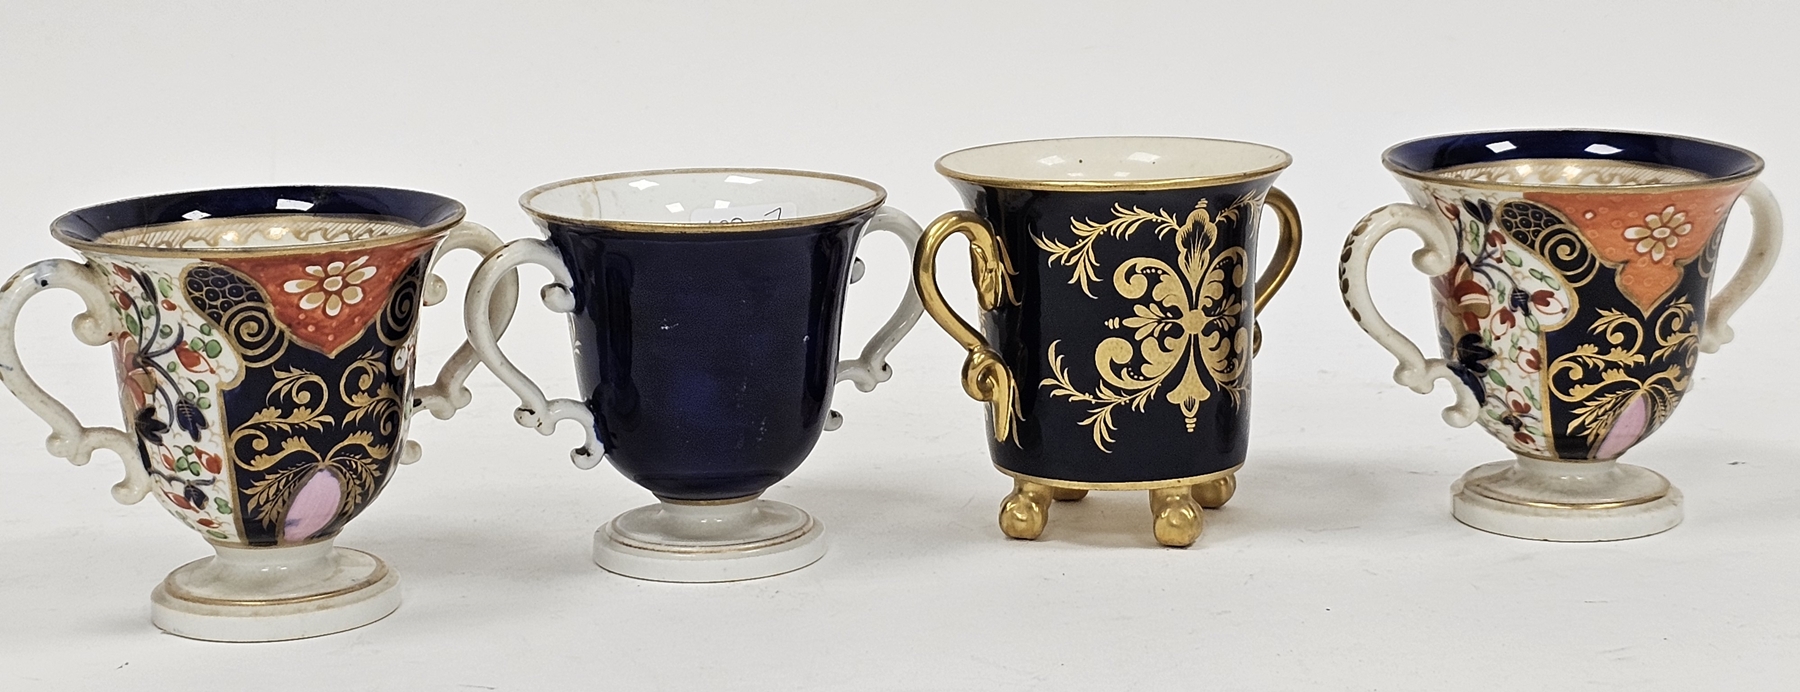 Group of Derby porcelain two-handled cups and a group of English porcelain coffee cans, circa 1820' - Image 4 of 6